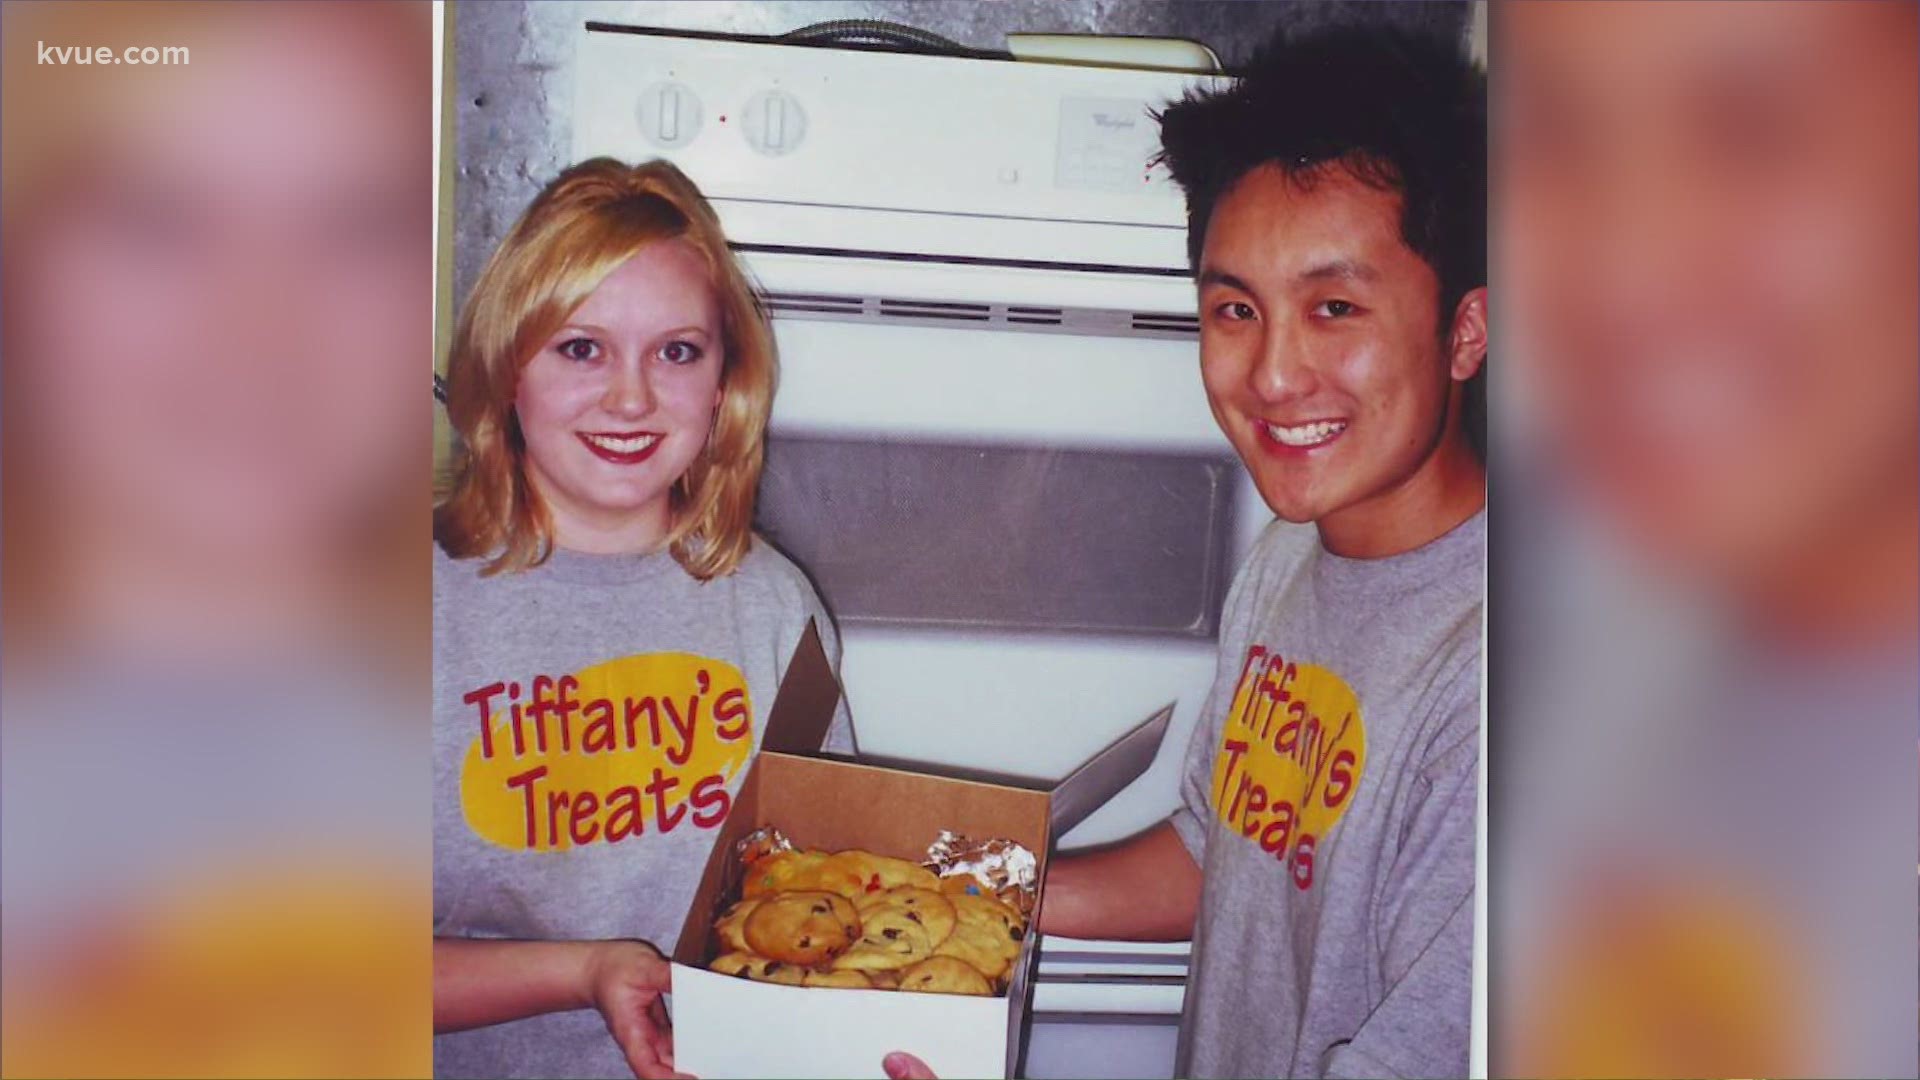 Austin-based Tiff's Treats found its very first customer – 22 years later. Meet Amy.